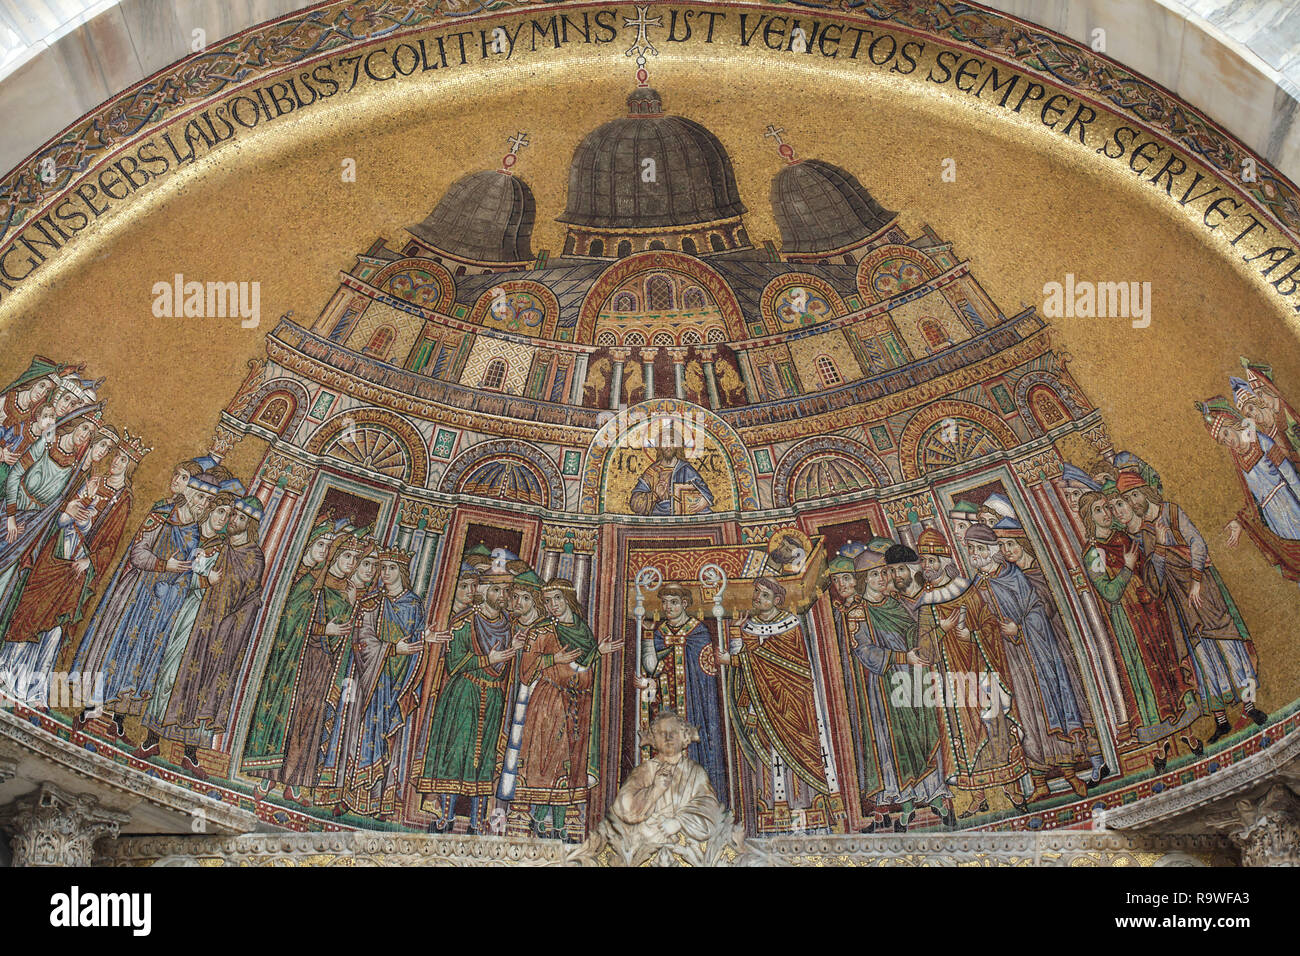 Transfer of the Body of Saint Mark to Saint Mark's Basilica. Byzantine mosaic dated from the 13th century in the lunette over the entrance to Saint Mark's Basilica (Basilica di San Marco) on Piazza San Marco in Venice, Italy. Stock Photo